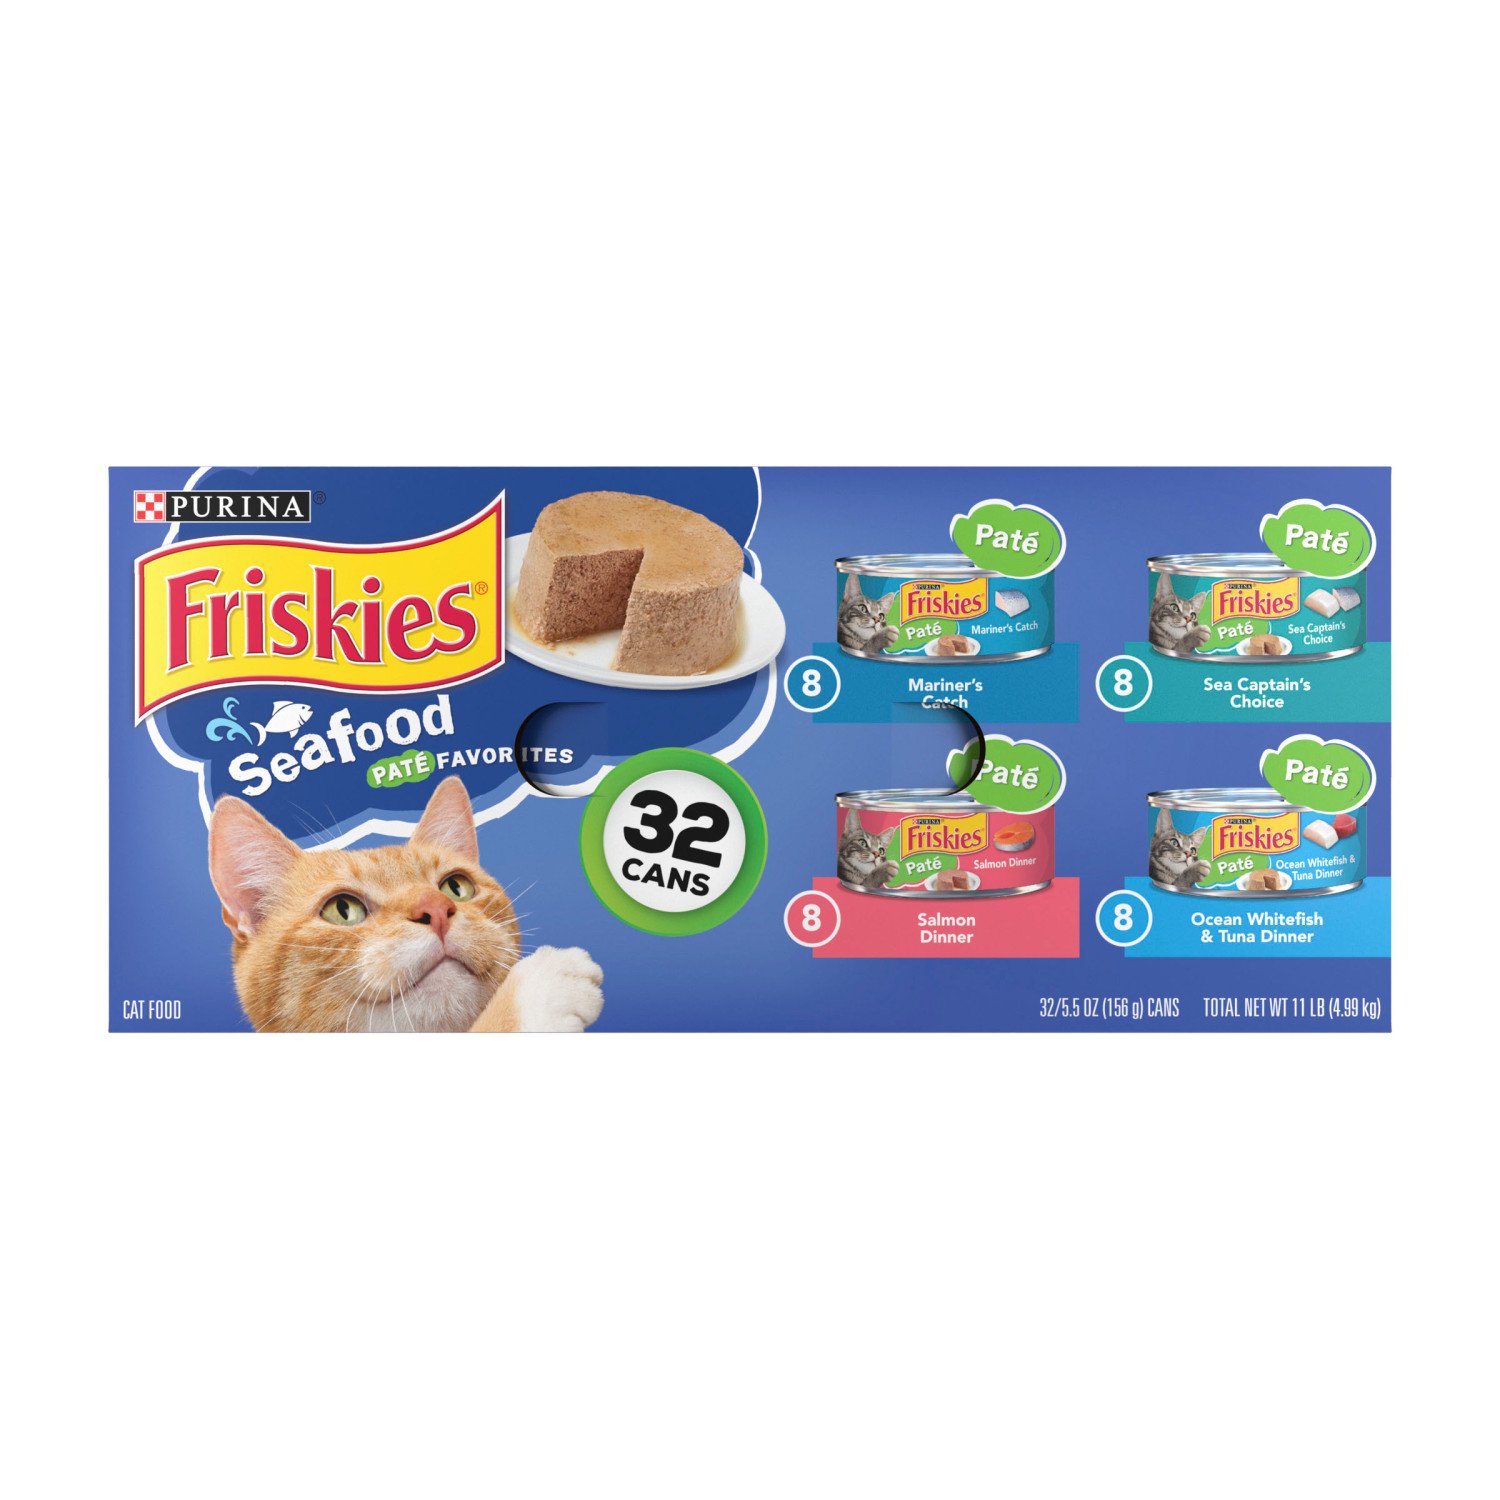 Purina Friskies Classic Pate Seafood Cat Food Variety Pack Shop Cats